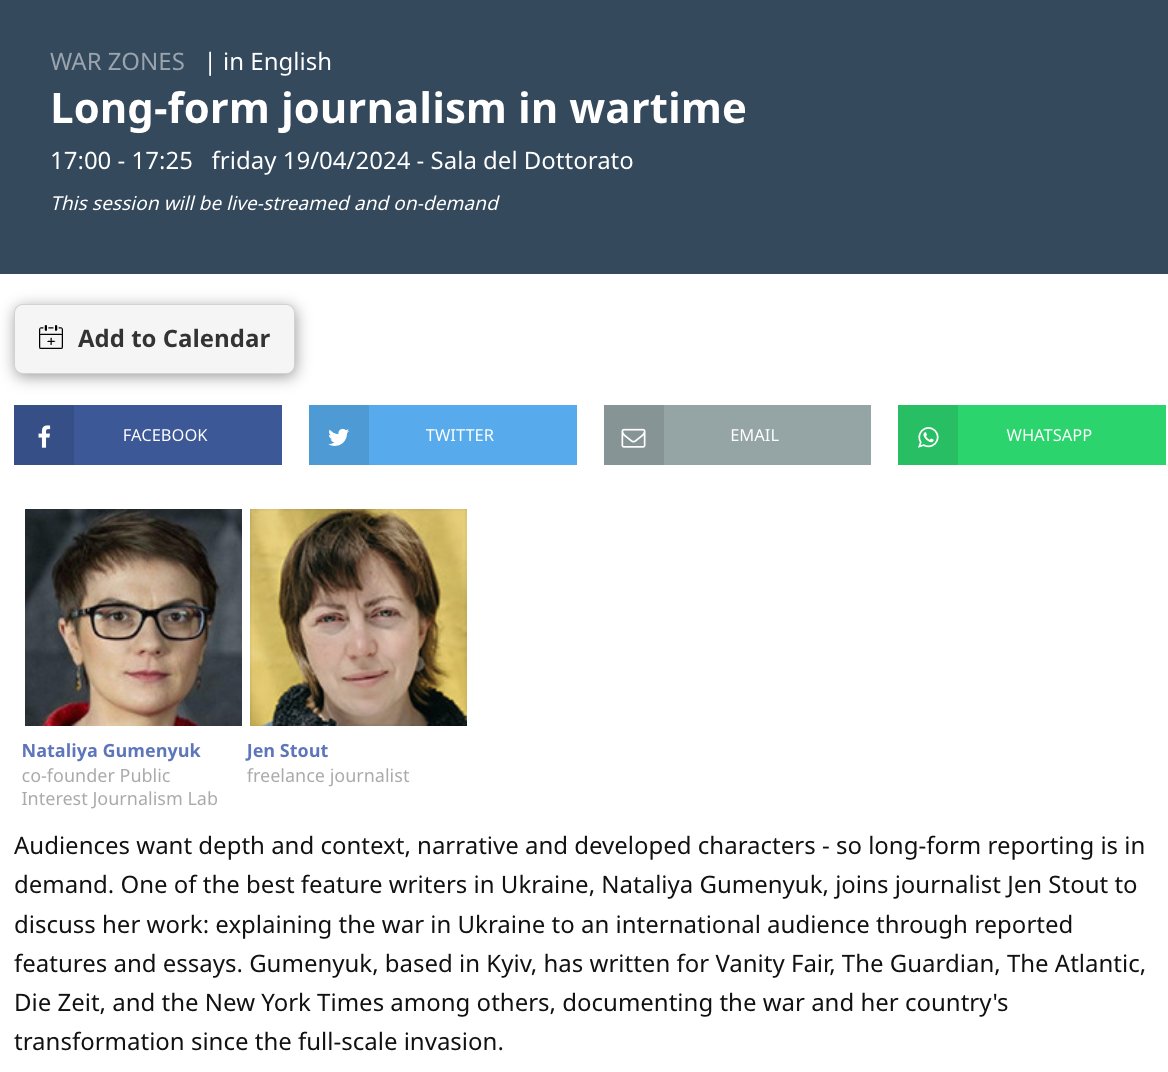 Honoured to share insights into our work at @journalismfest in Perugia. Long-form writing is an incredible responsibility. I'd also speak about how to insert social research into reporting, and about our recent criminal complaint on tortures in Argentina journalismfestival.com/programme/2024…